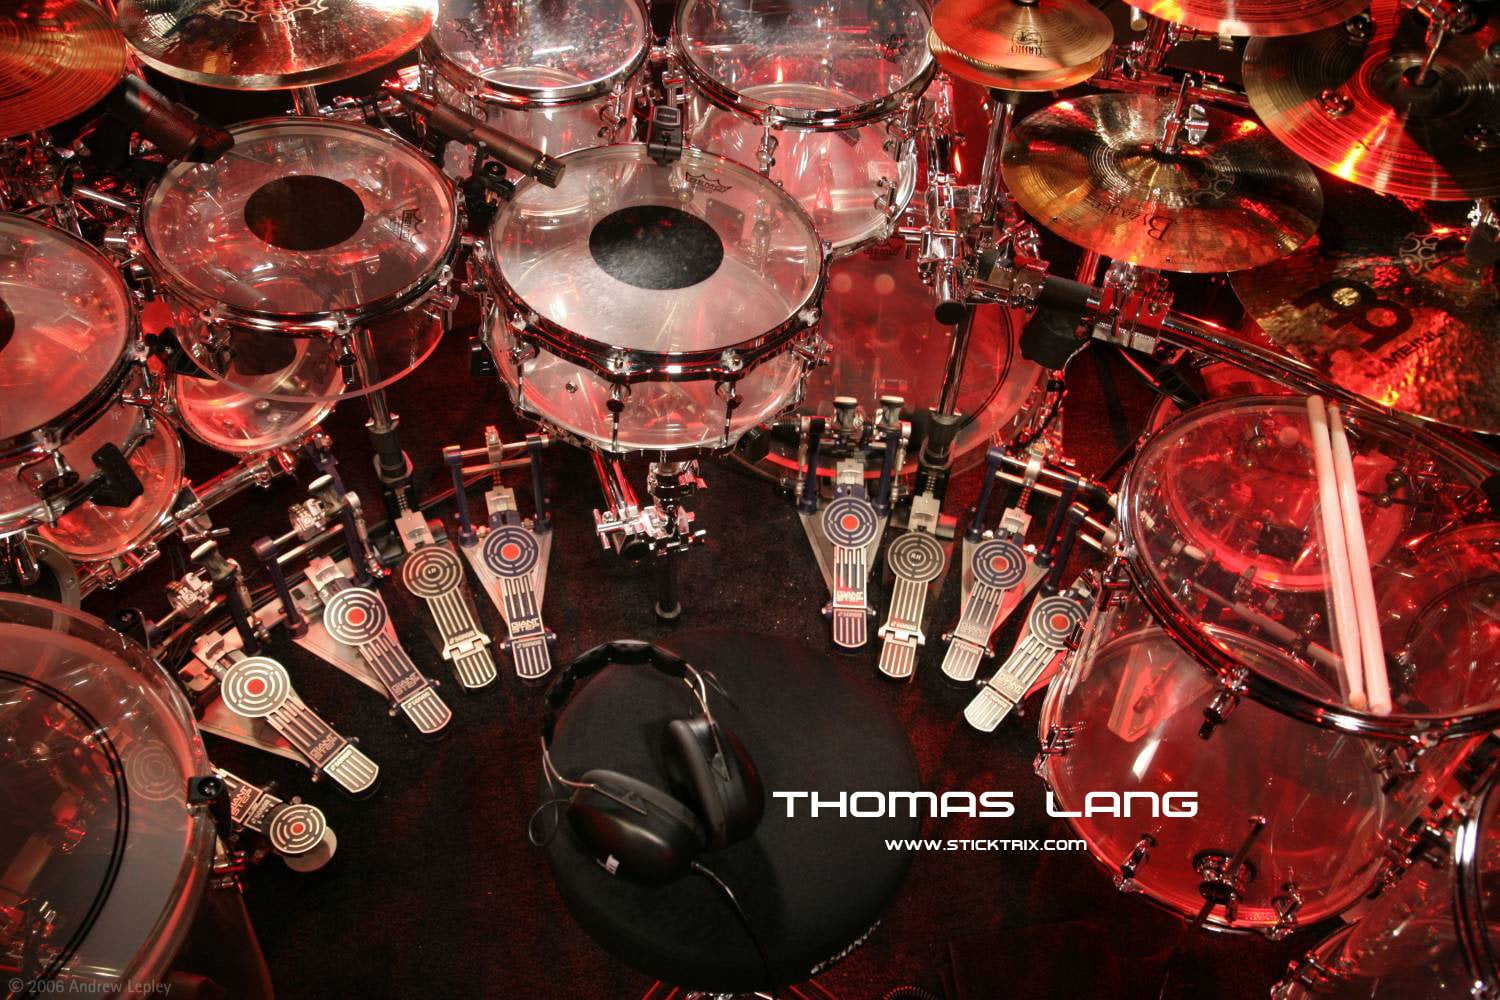 gray-and-white drum set, Music, Drums, indoors, red, large group of objects